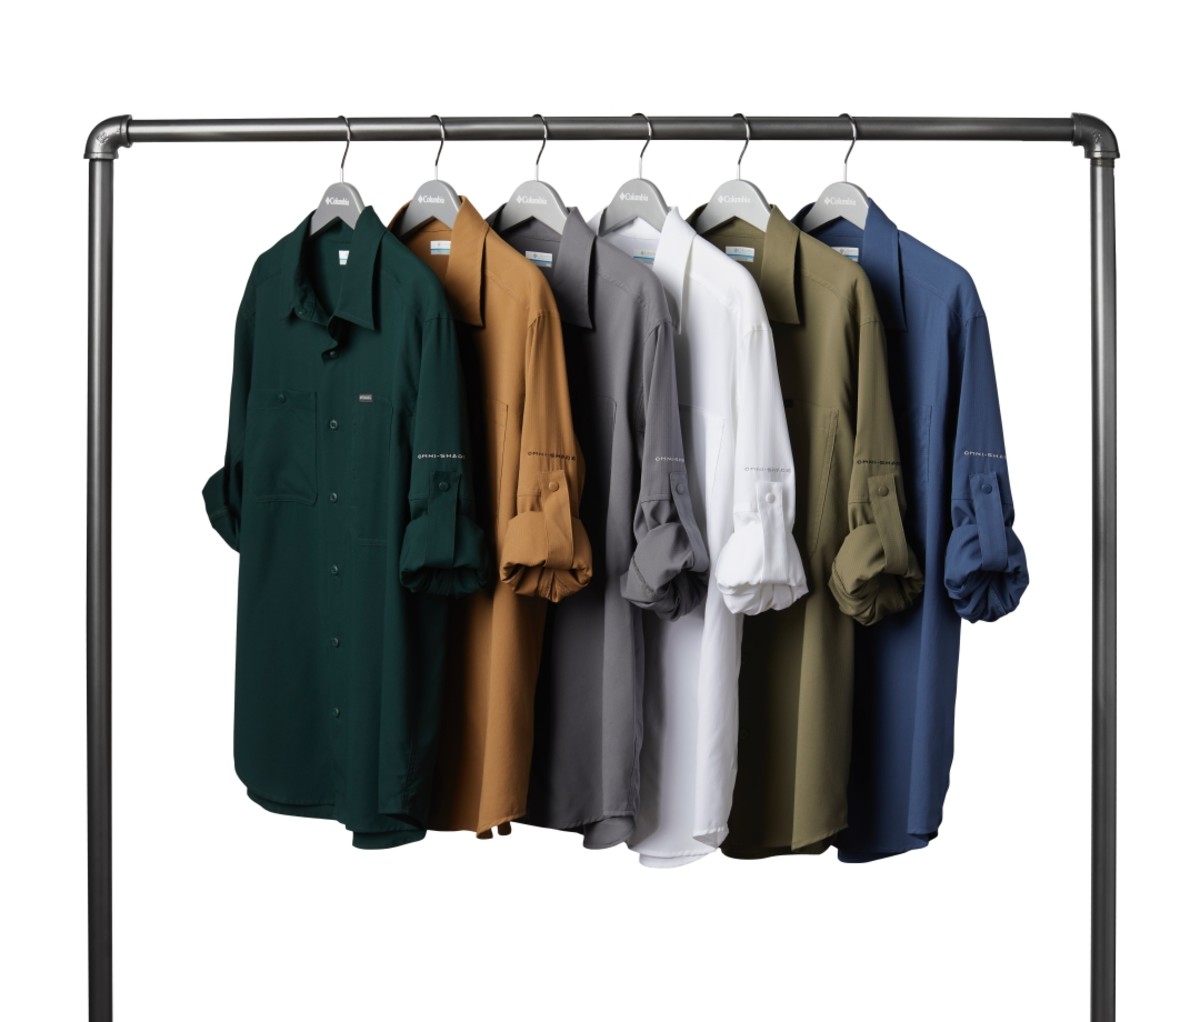 Columbia Silver Ridge shirts on hangers on a rack on a white background.